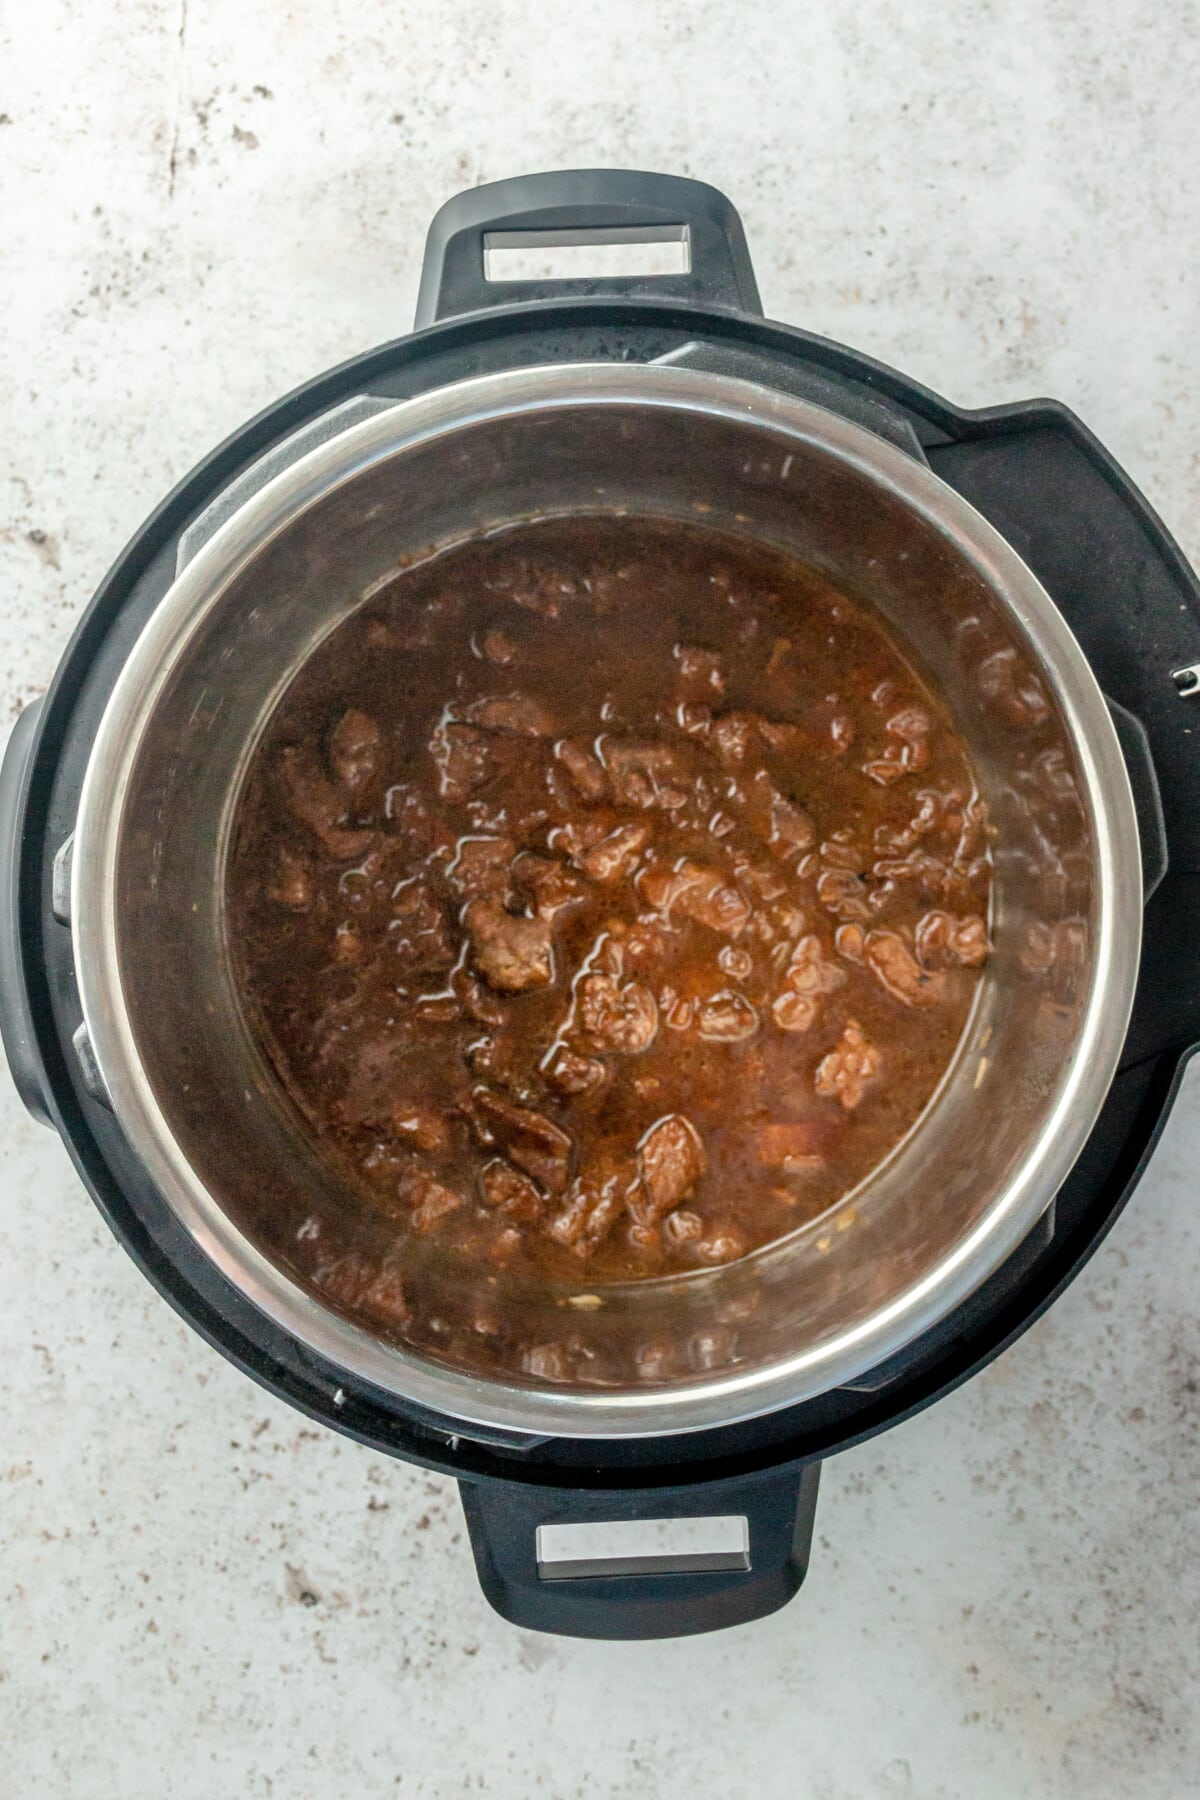 A beef stew mixture sits in an instant pot on a light grey colored surface.